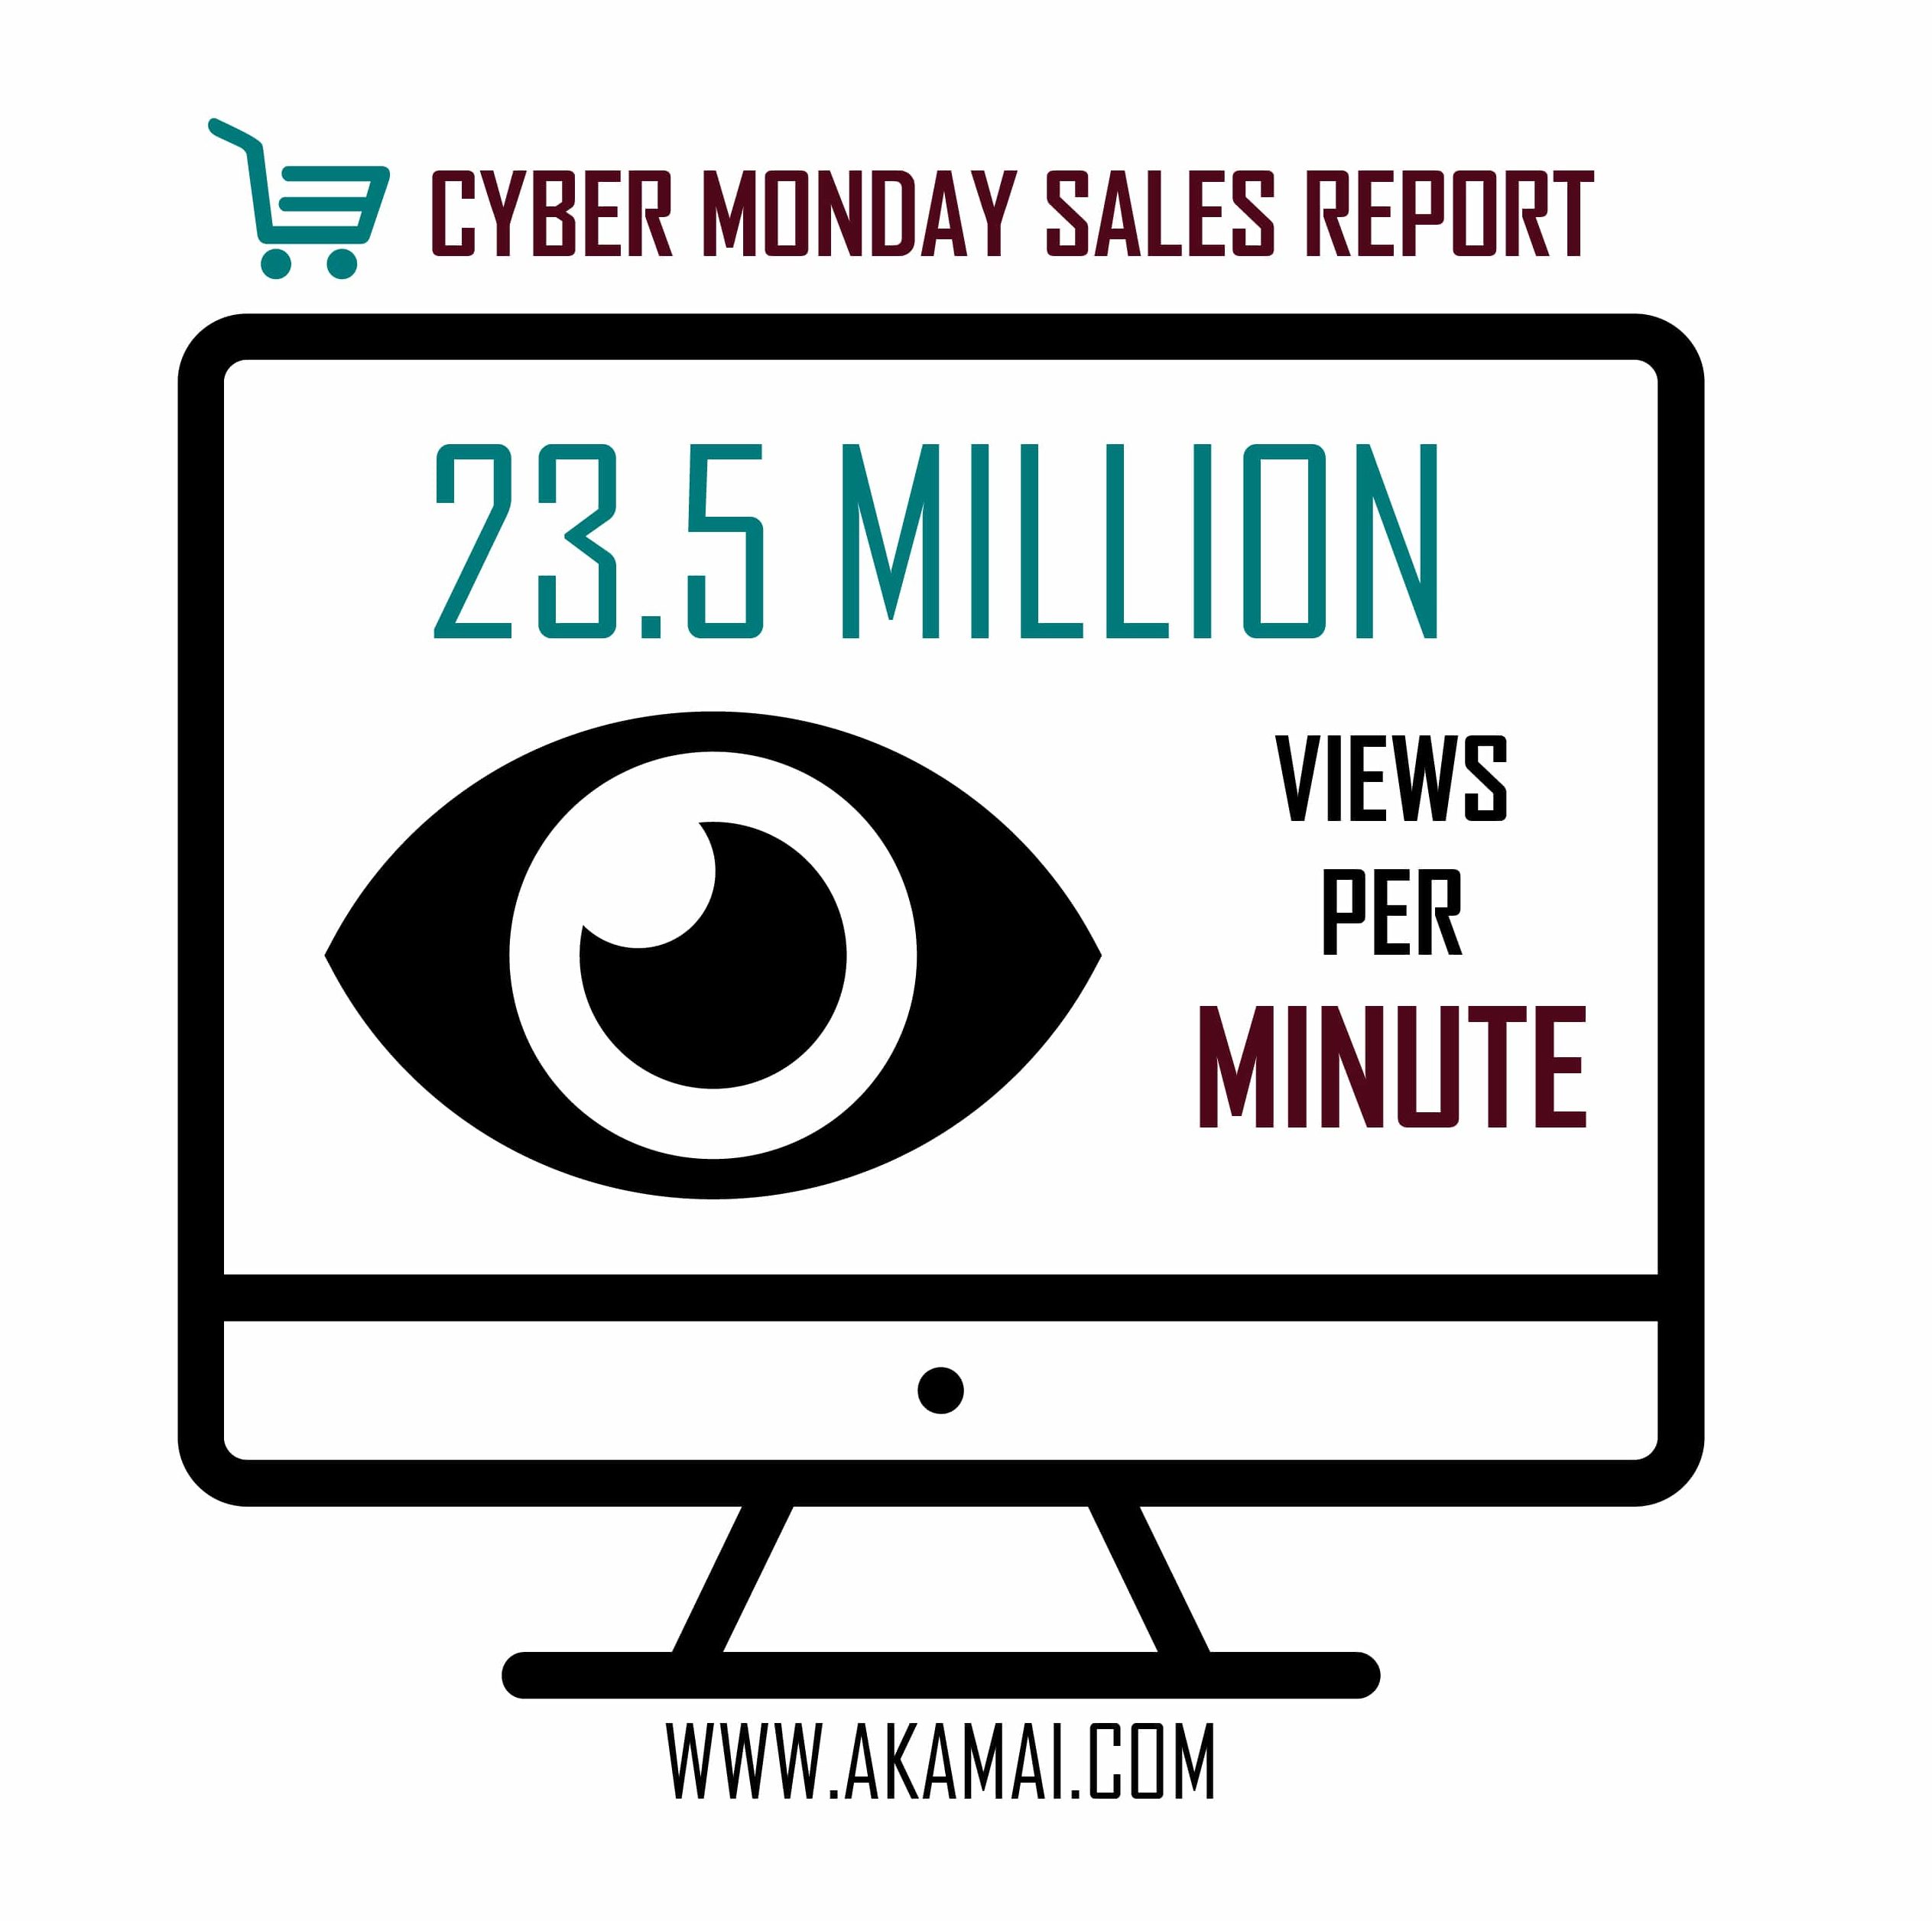 Cyber Monday Expected Sales - IU Ecommerce Support Services